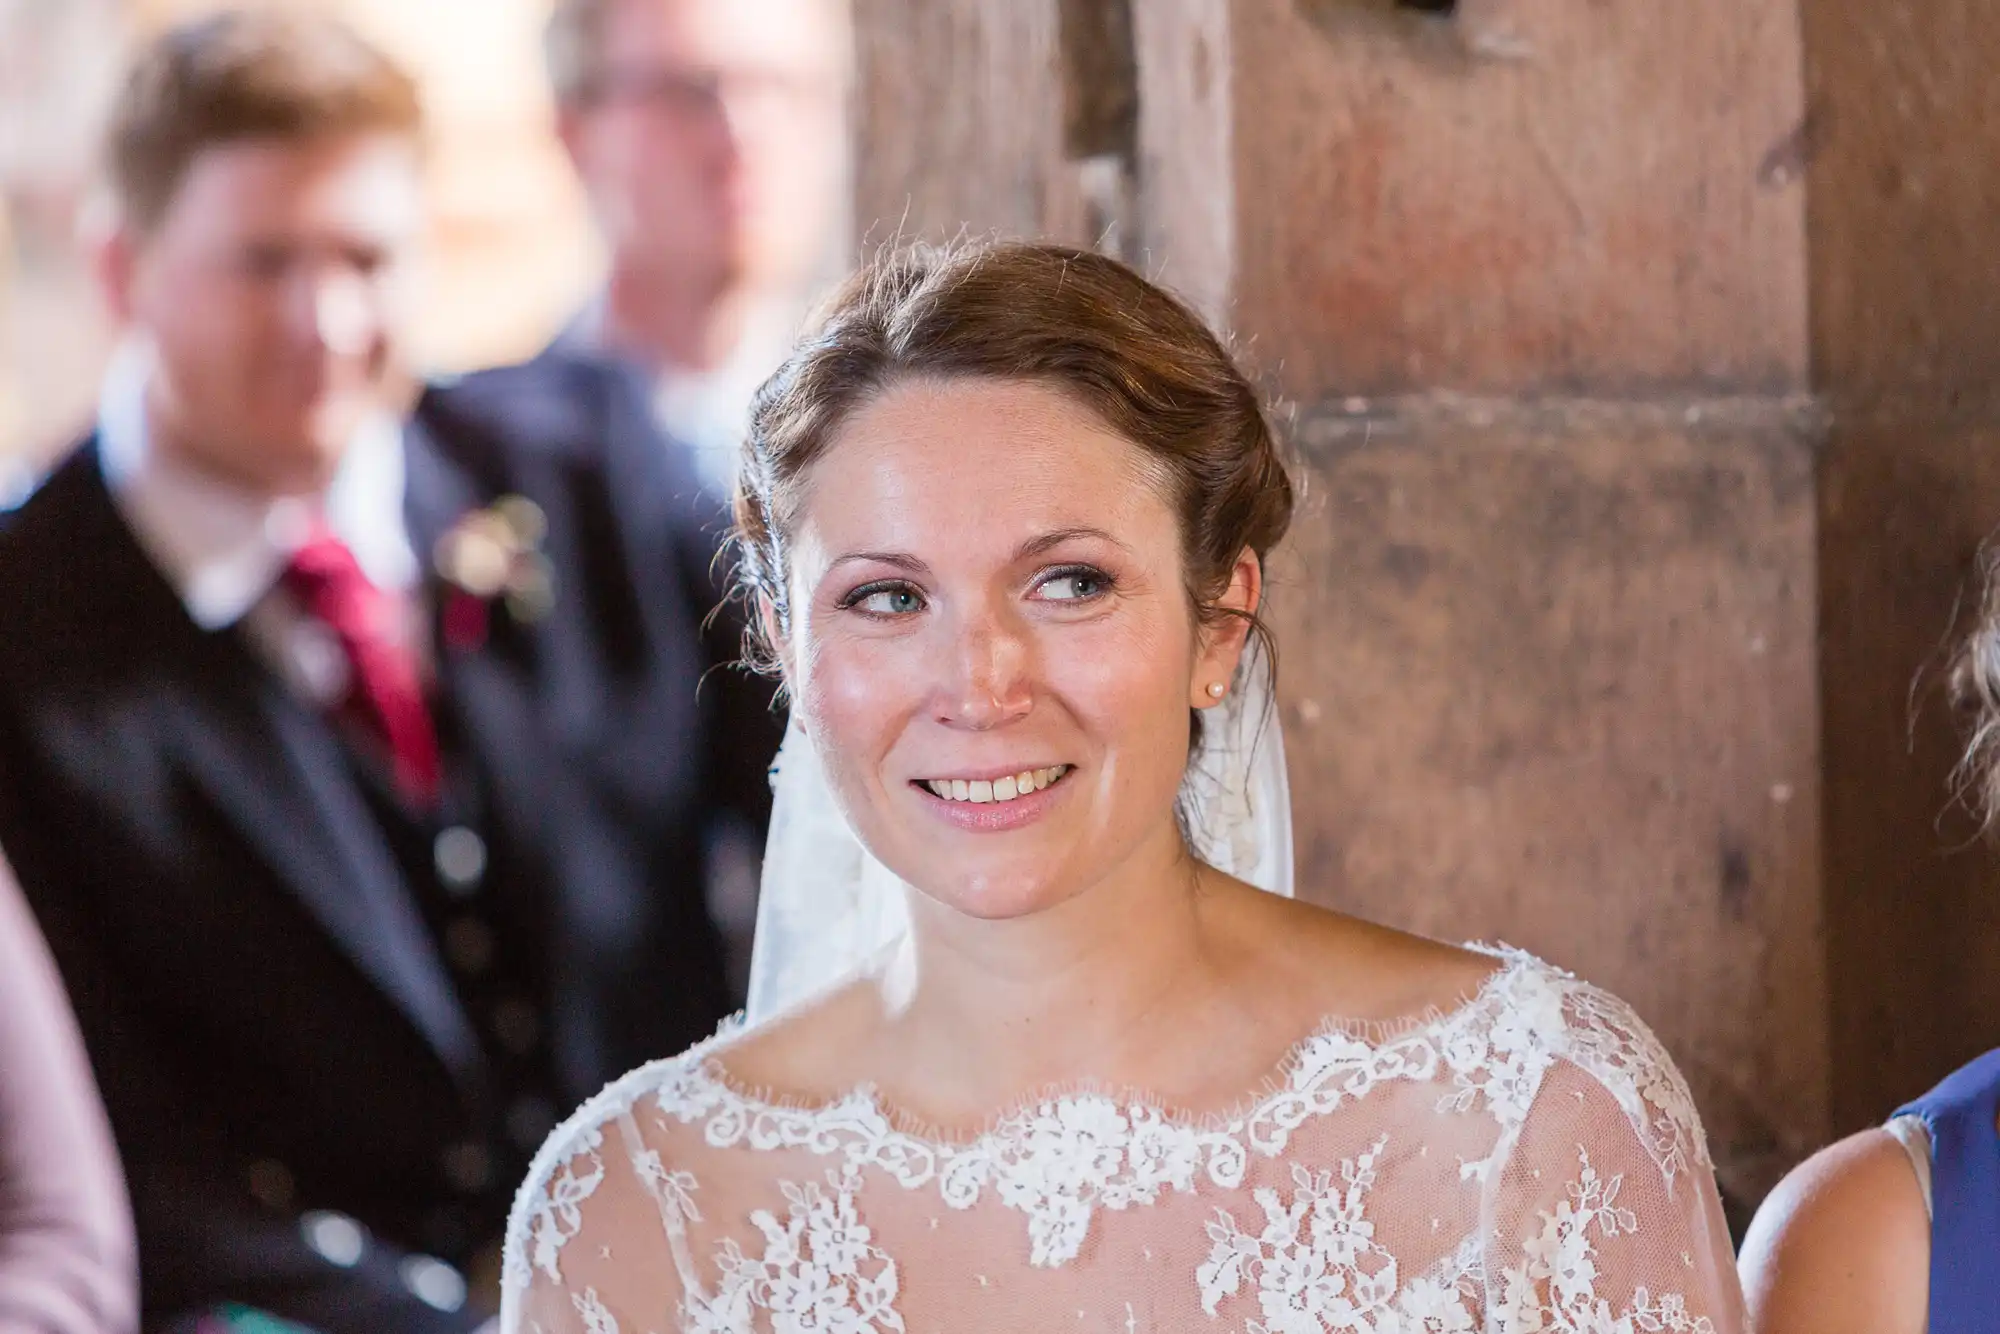 A bride in a lace wedding dress smiling softly during a ceremony, with out-of-focus guests in the background.